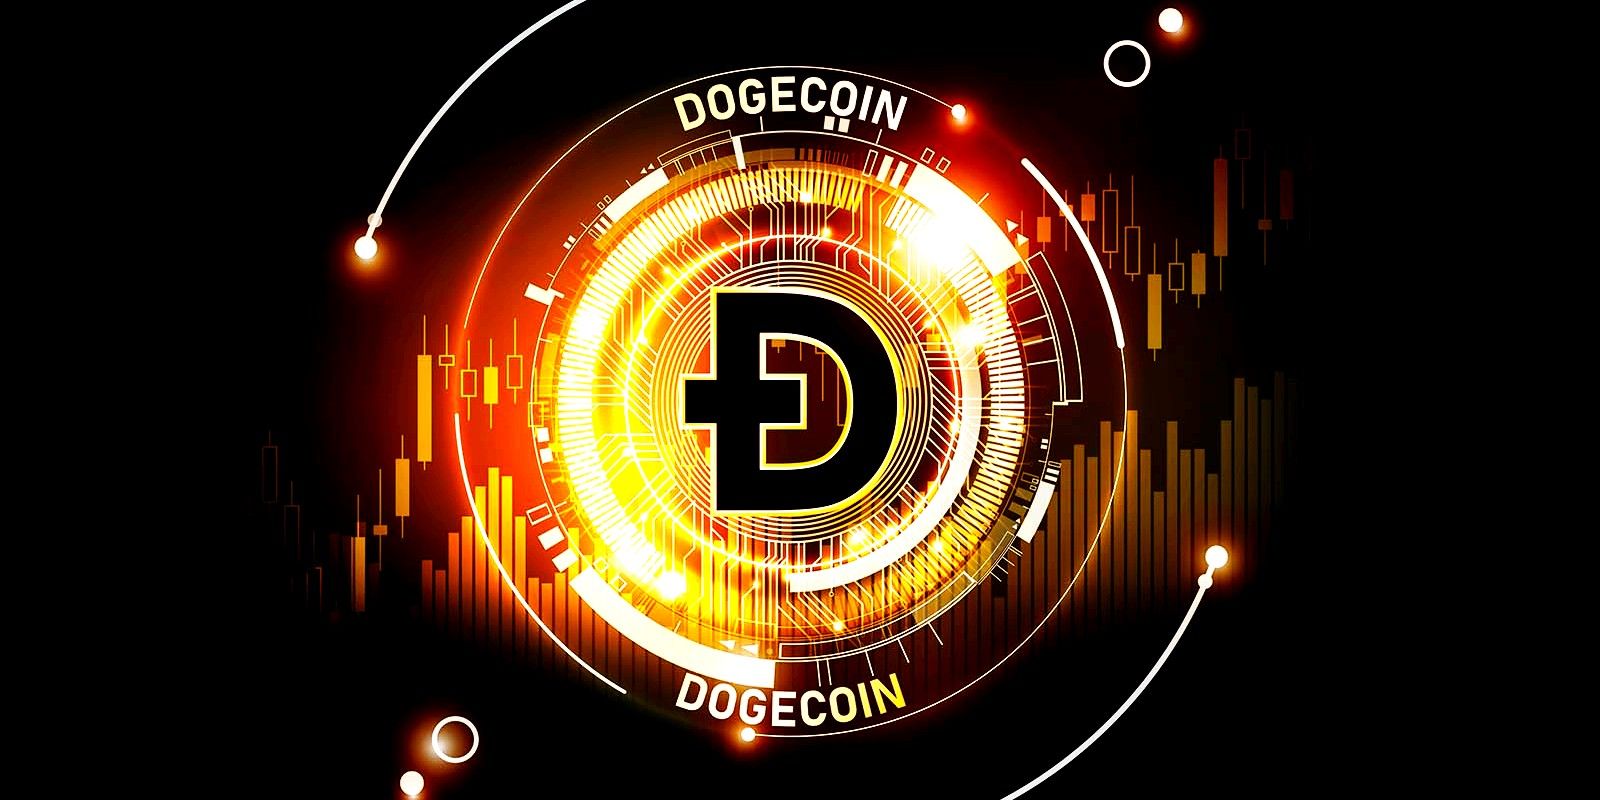 Dogecoin symbol surrounded by glowing digital art